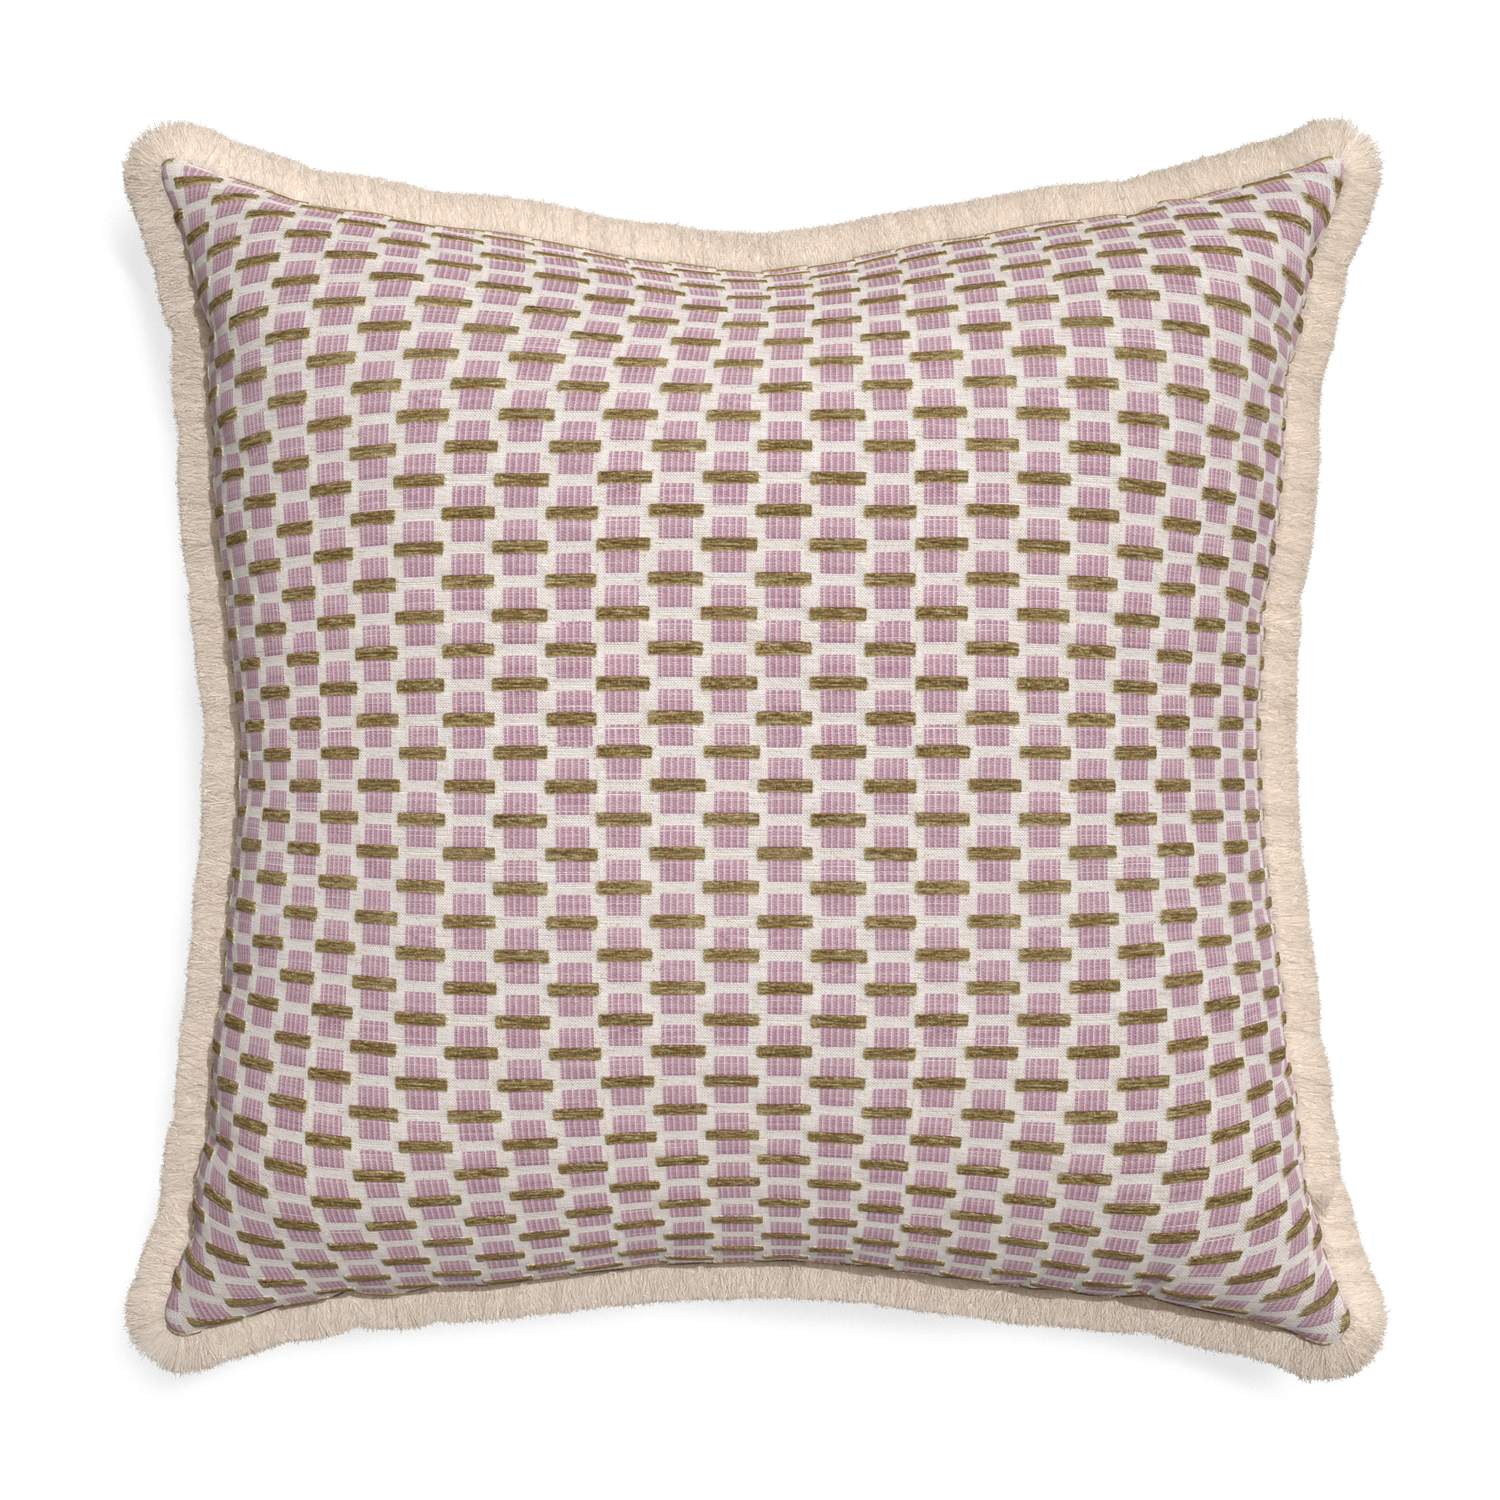 Euro-sham willow orchid custom pink geometric chenillepillow with cream fringe on white background